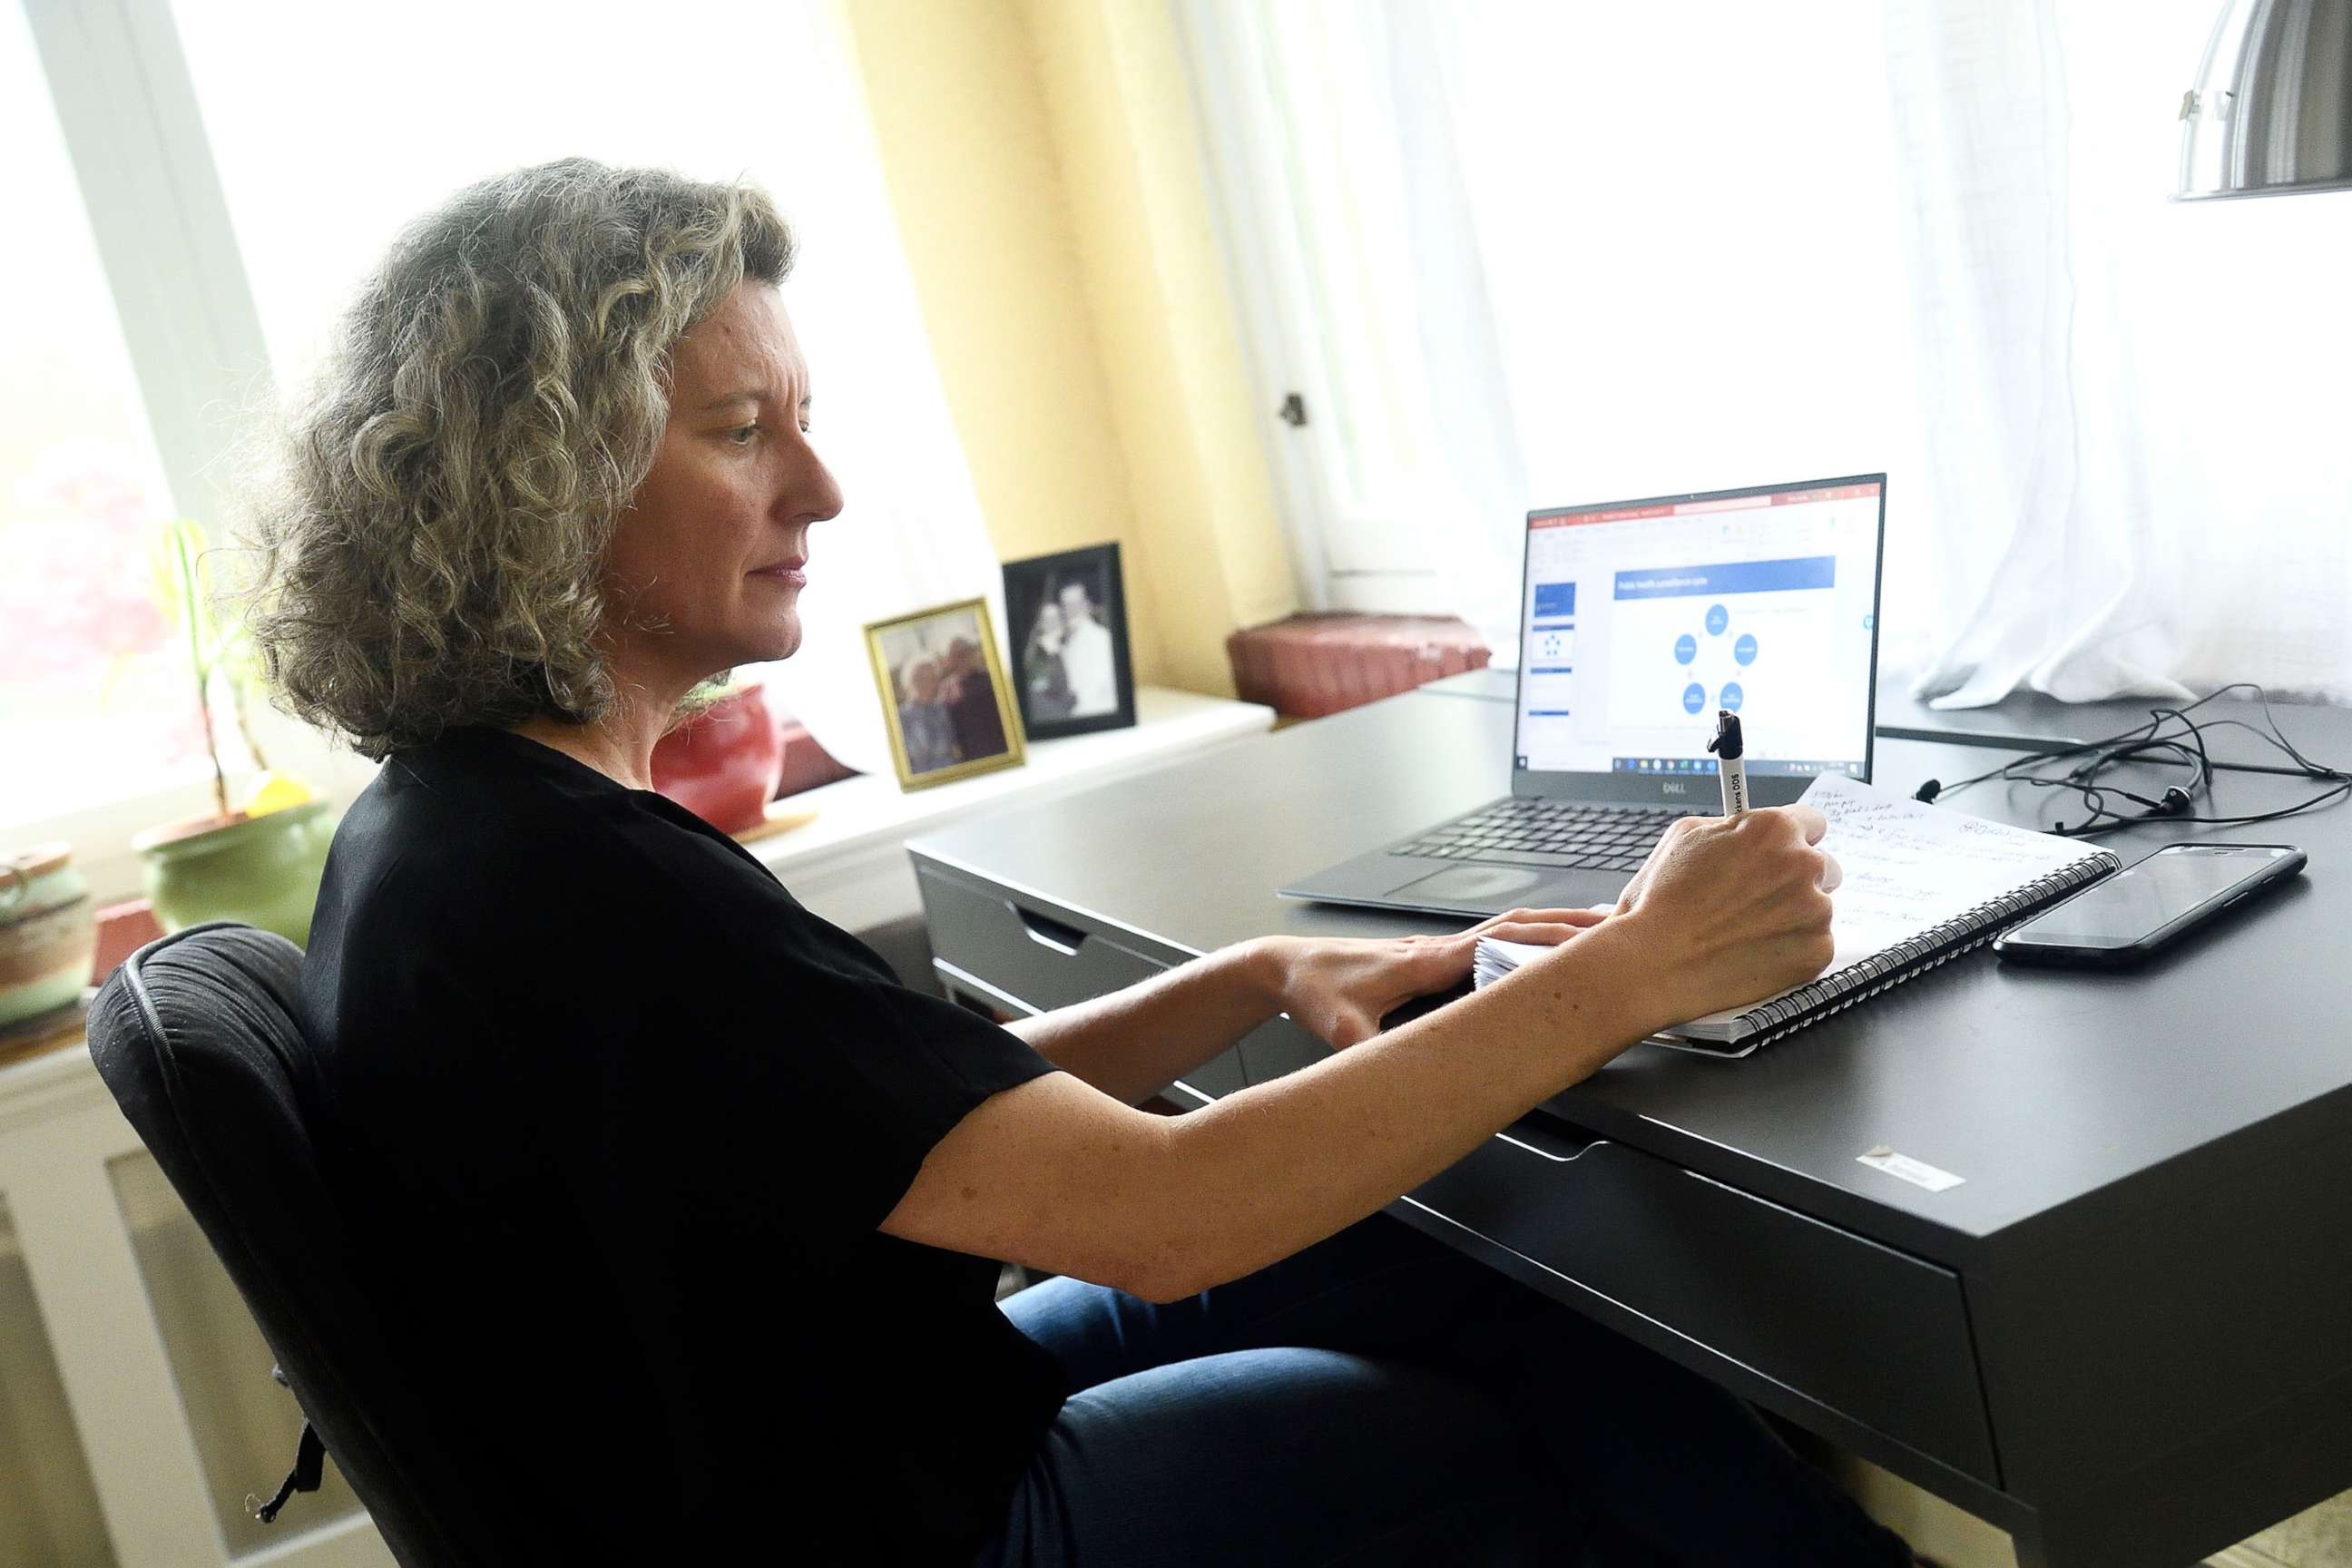 PHOTO: Epidemiology Professor Emily Gurley of the Bloomberg School of Public Health works from home during the Covid-19 pandemic shutdown. Dr. Gurley is training students and colleagues to do contact tracing work with the Baltimore City Health Department.